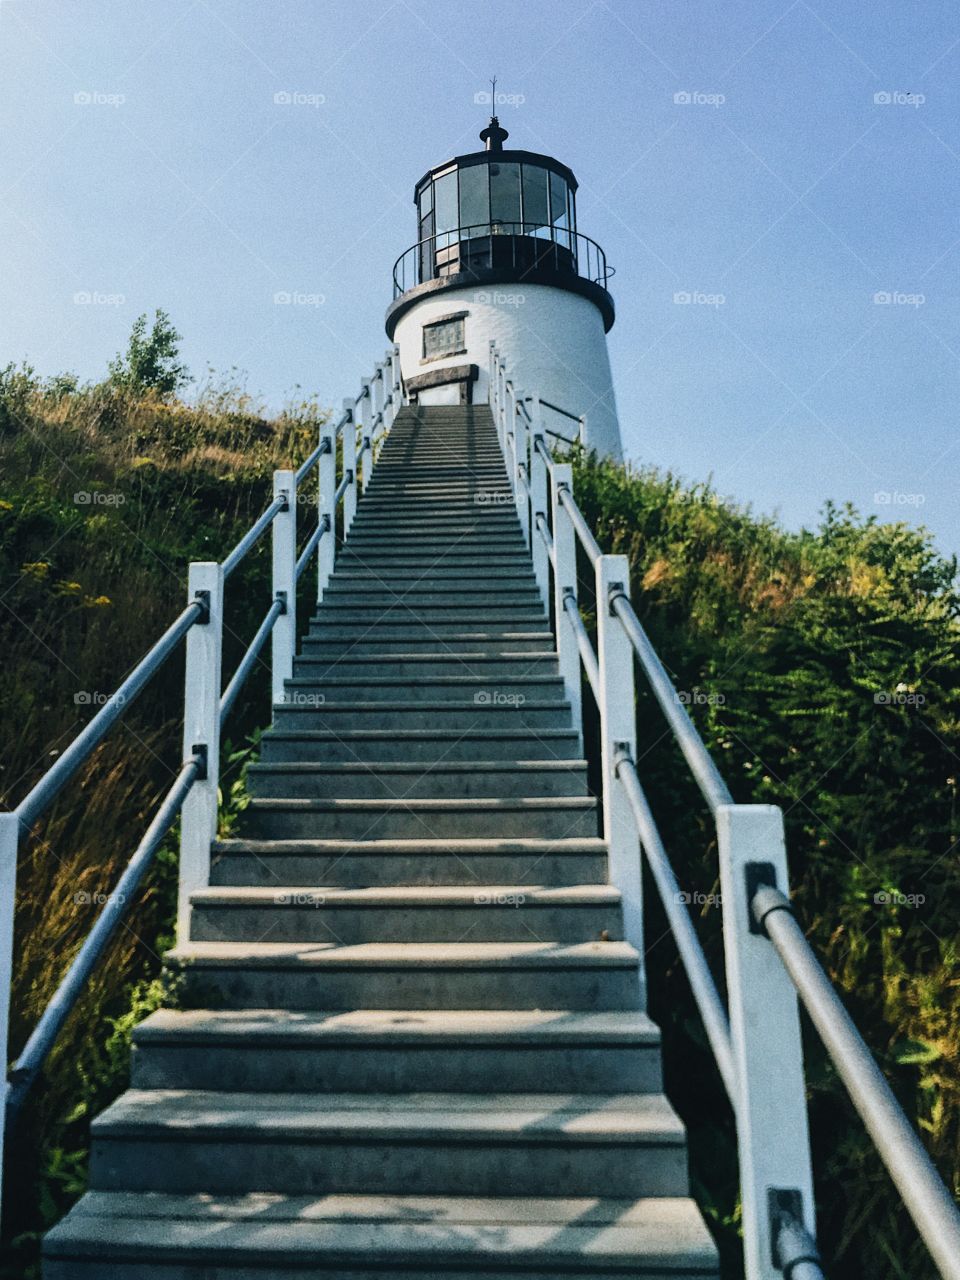 Staircase Up to a Gorgeous Lighthouse in Maine